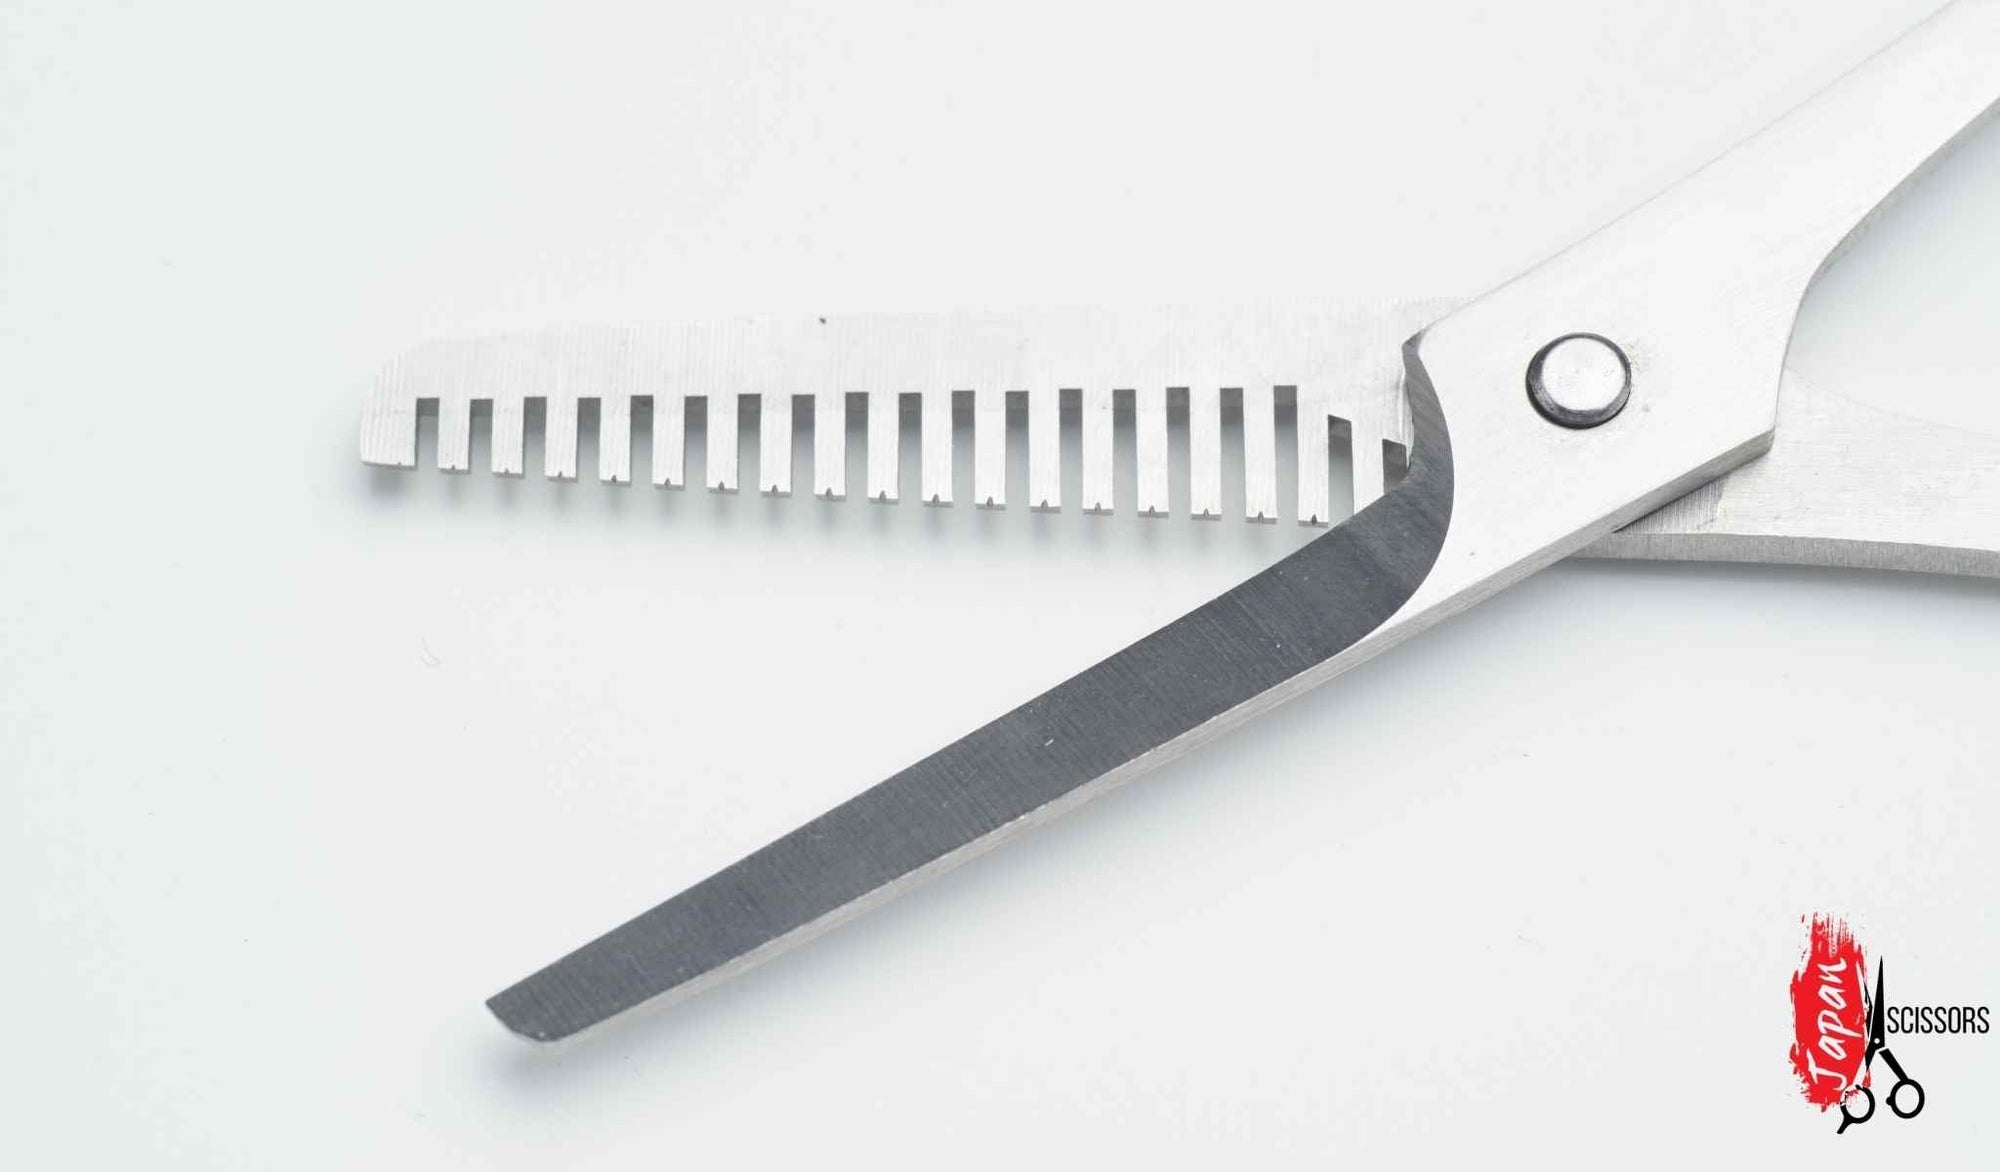 How Many Teeth Should My Thinning Scissors Have? Thinning Shears Teeth - Japan Scissors USA